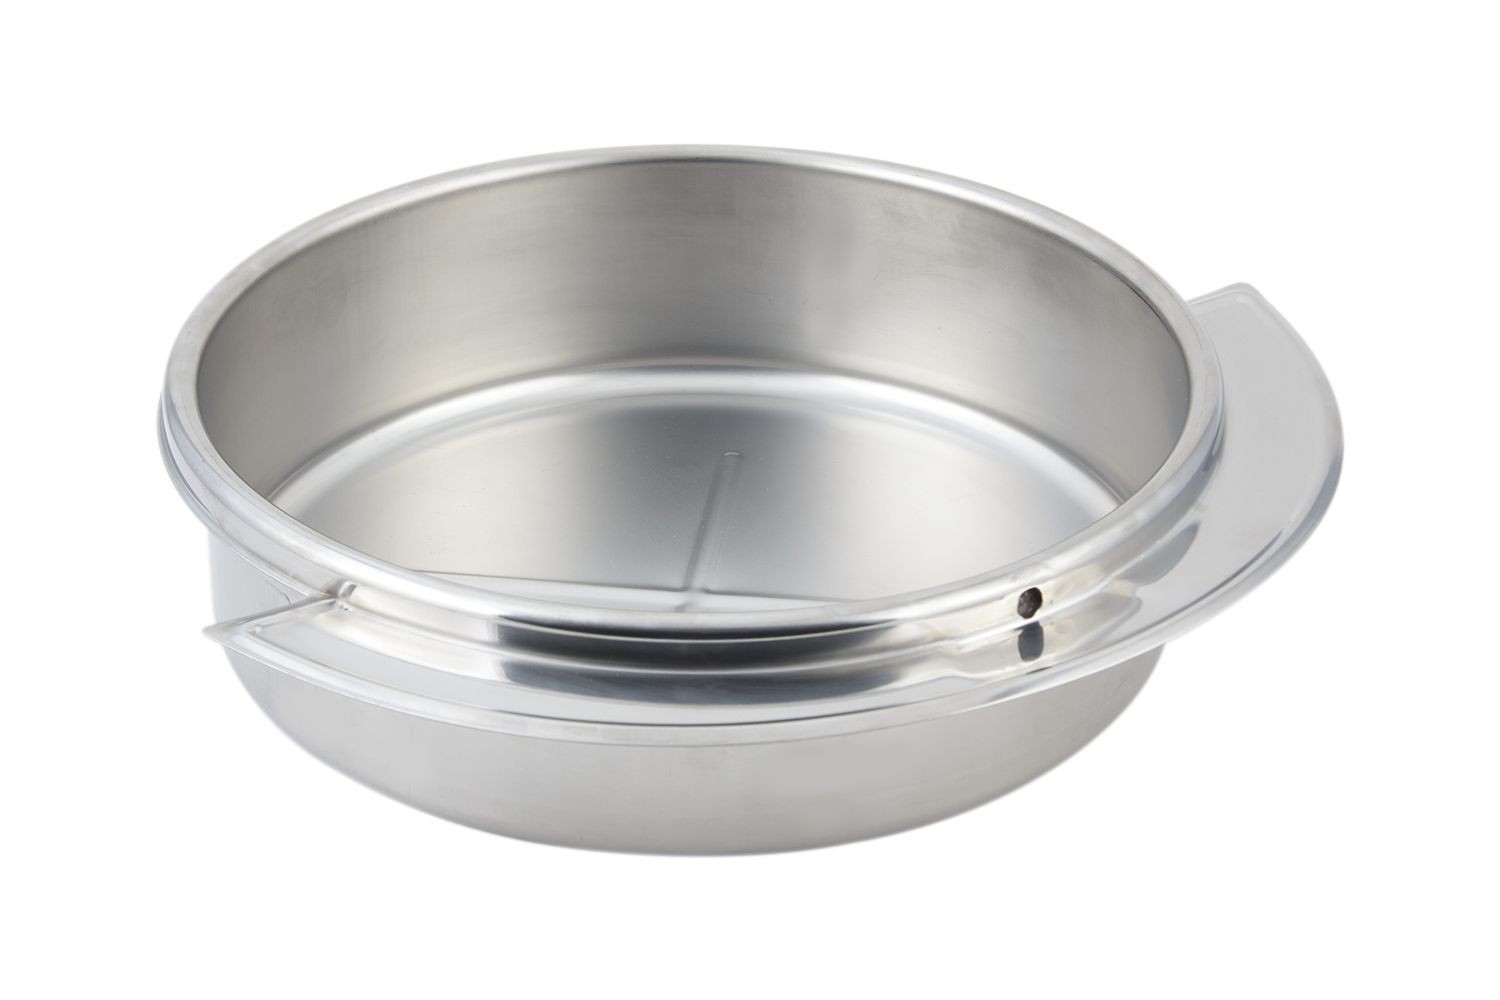 Bon Chef 11002 Stainless Steel Dripless Round Water Pan, 8 Qt. - LionsDeal Stainless Steel Round Stock Near Me